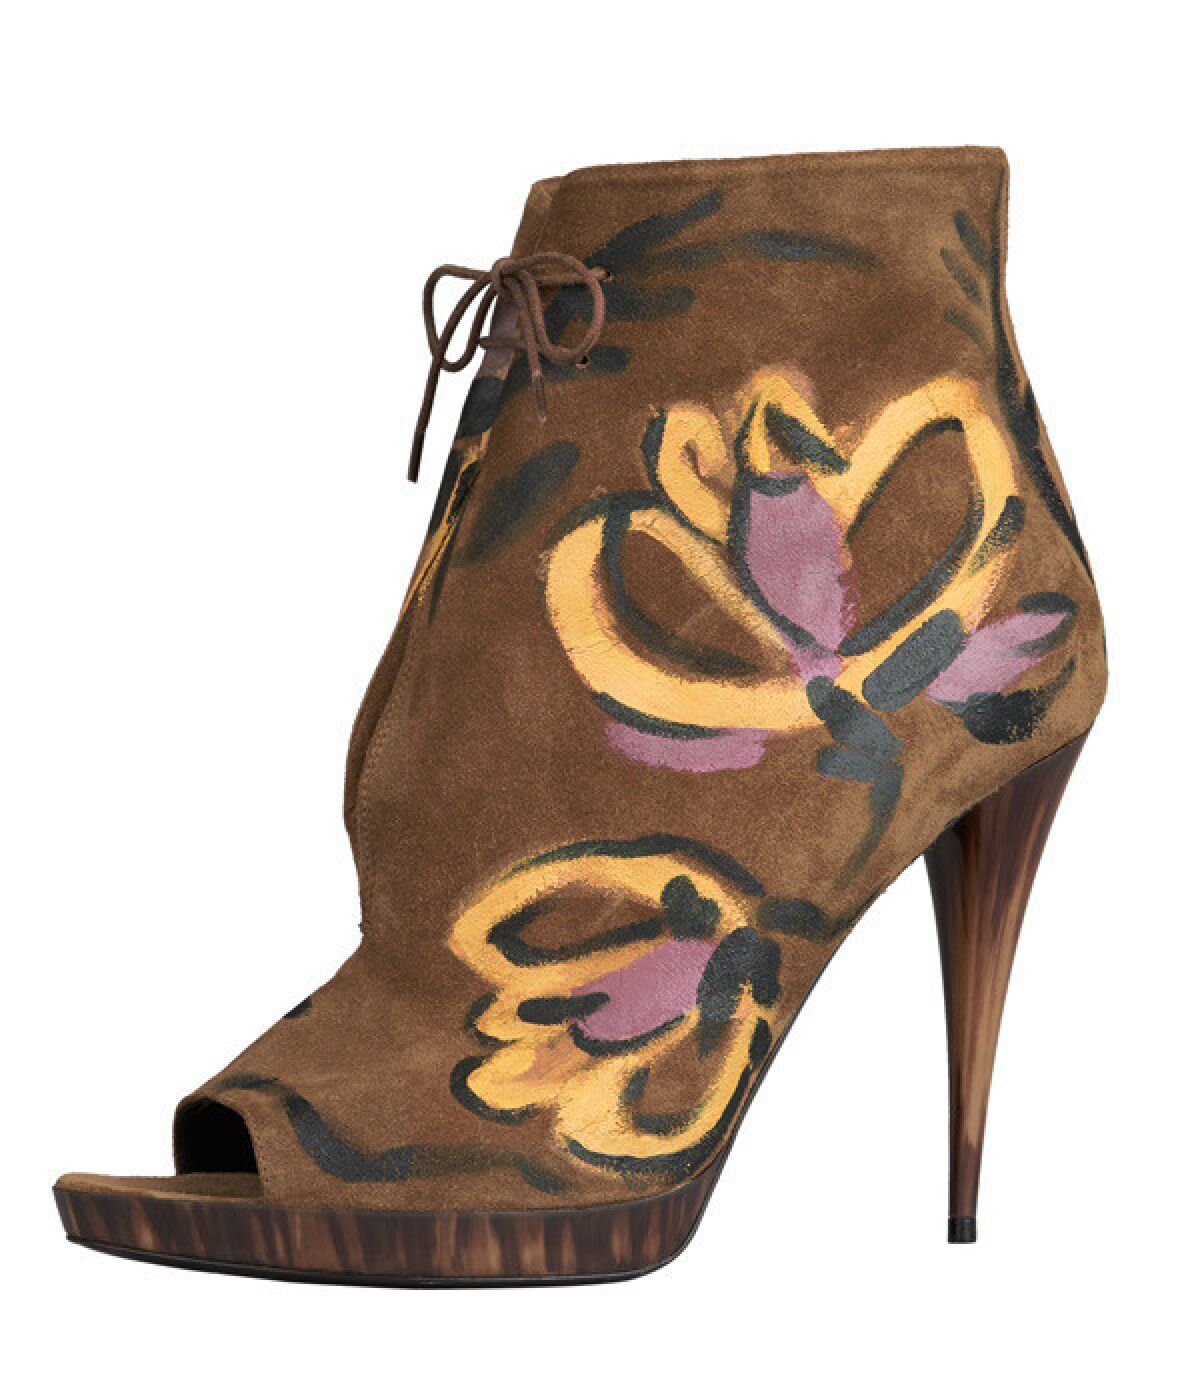 Burberry Prorsum hand-painted calf suede ankle boots.